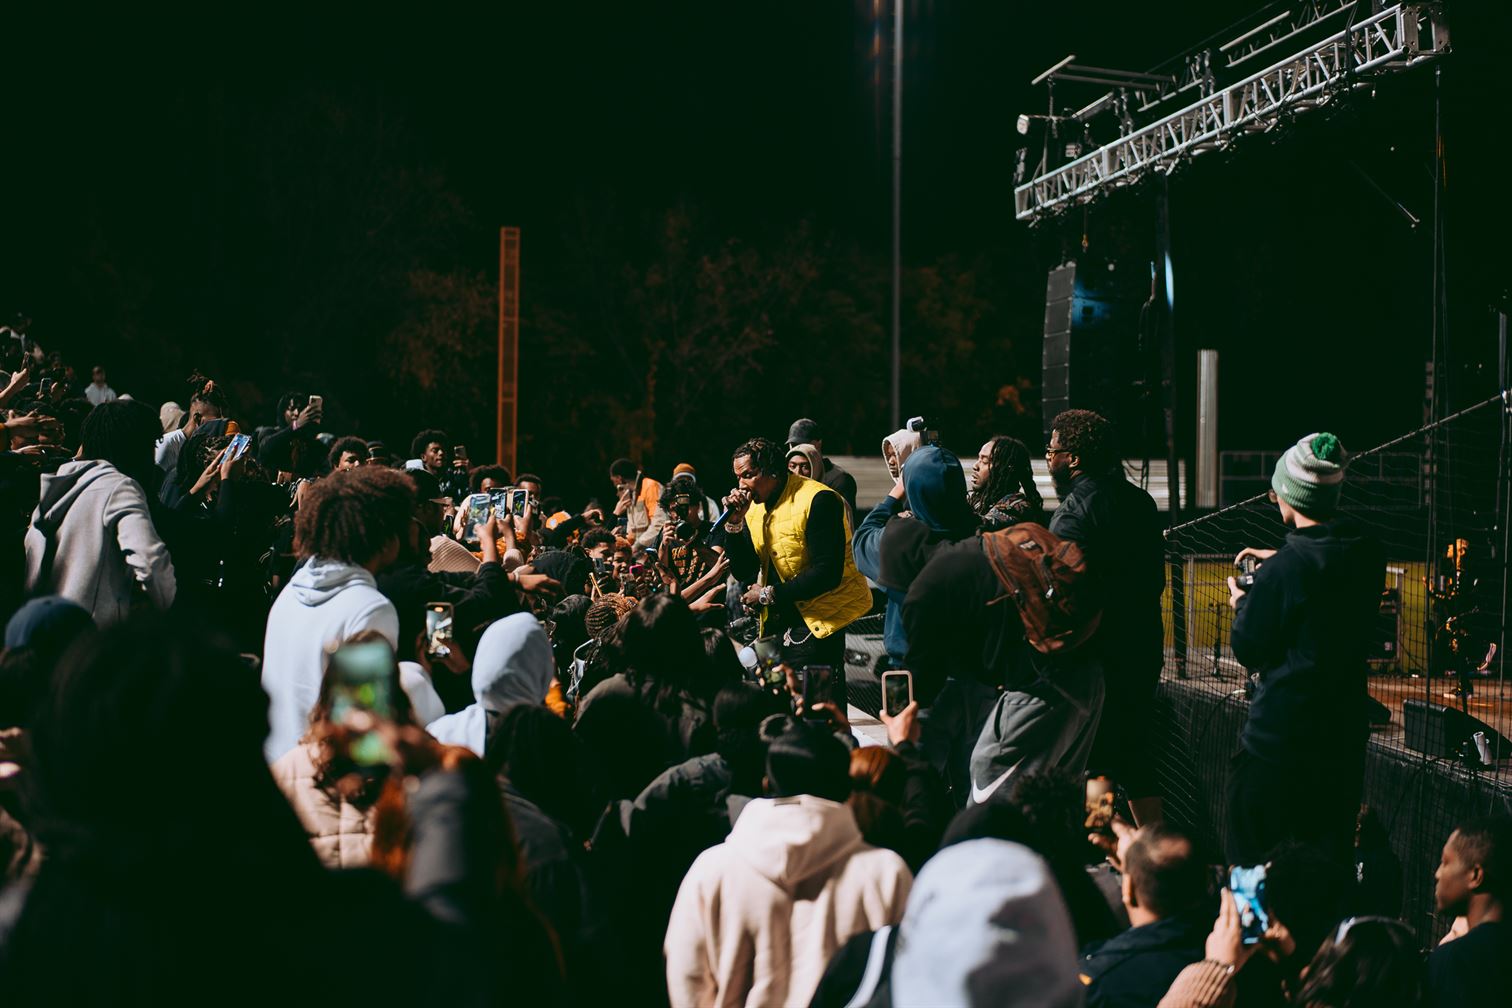 Rapper MoneyBagg Yo interacts with the crowd. Photo courtesy of Shane Nourie